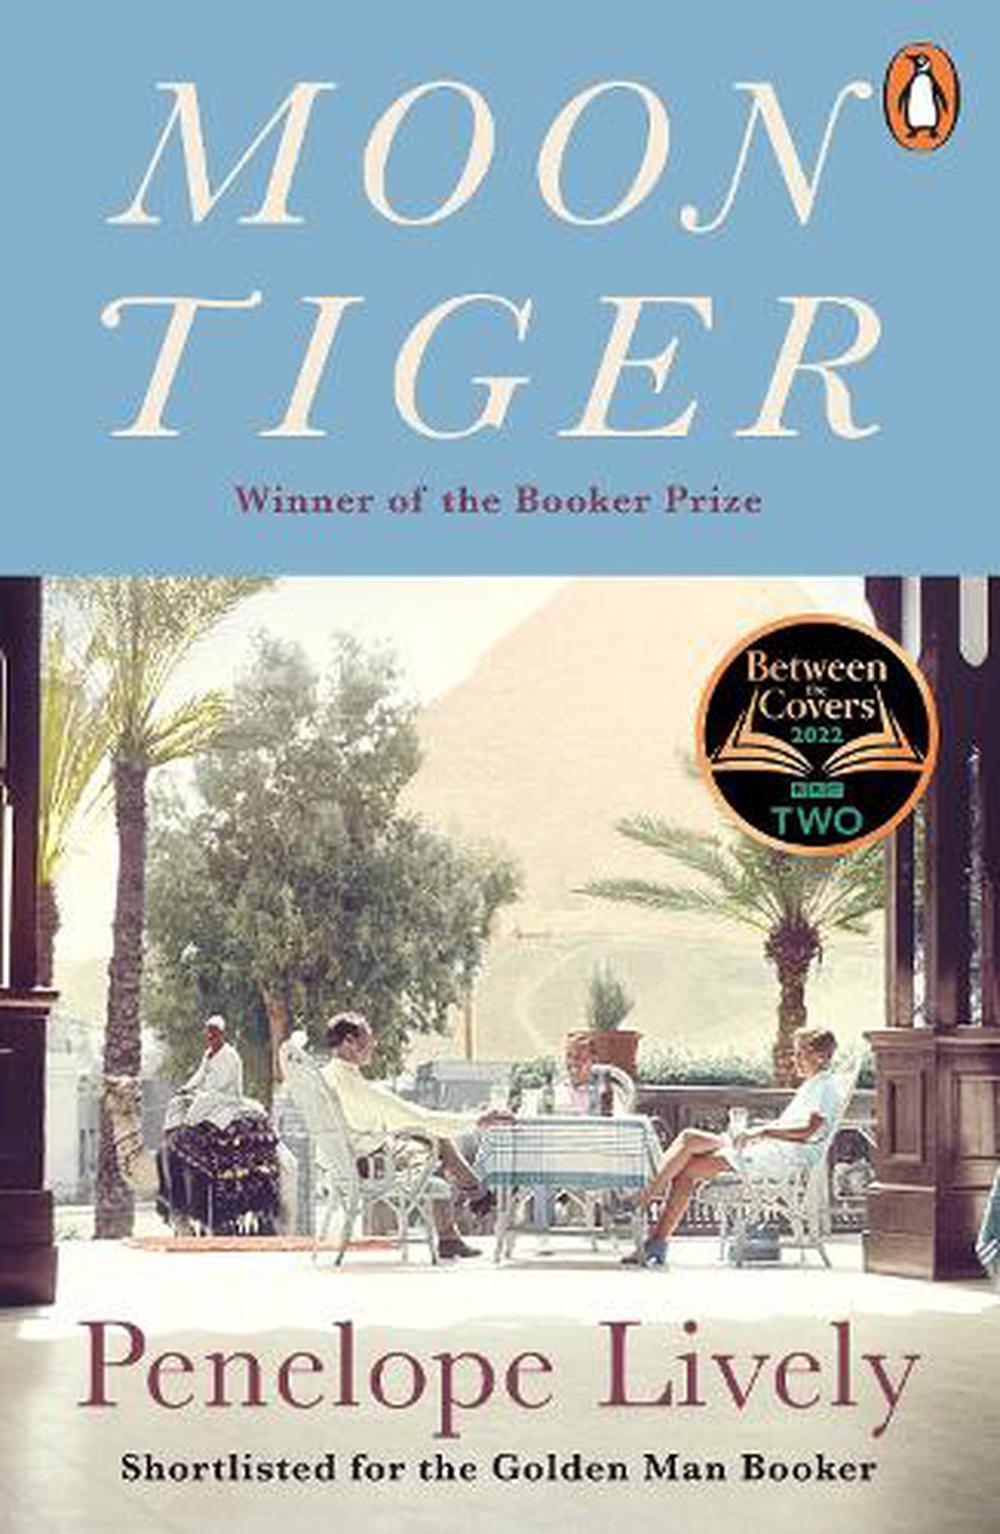 Moon Tiger by Penelope Lively (English) Paperback Book Free Shipping ...